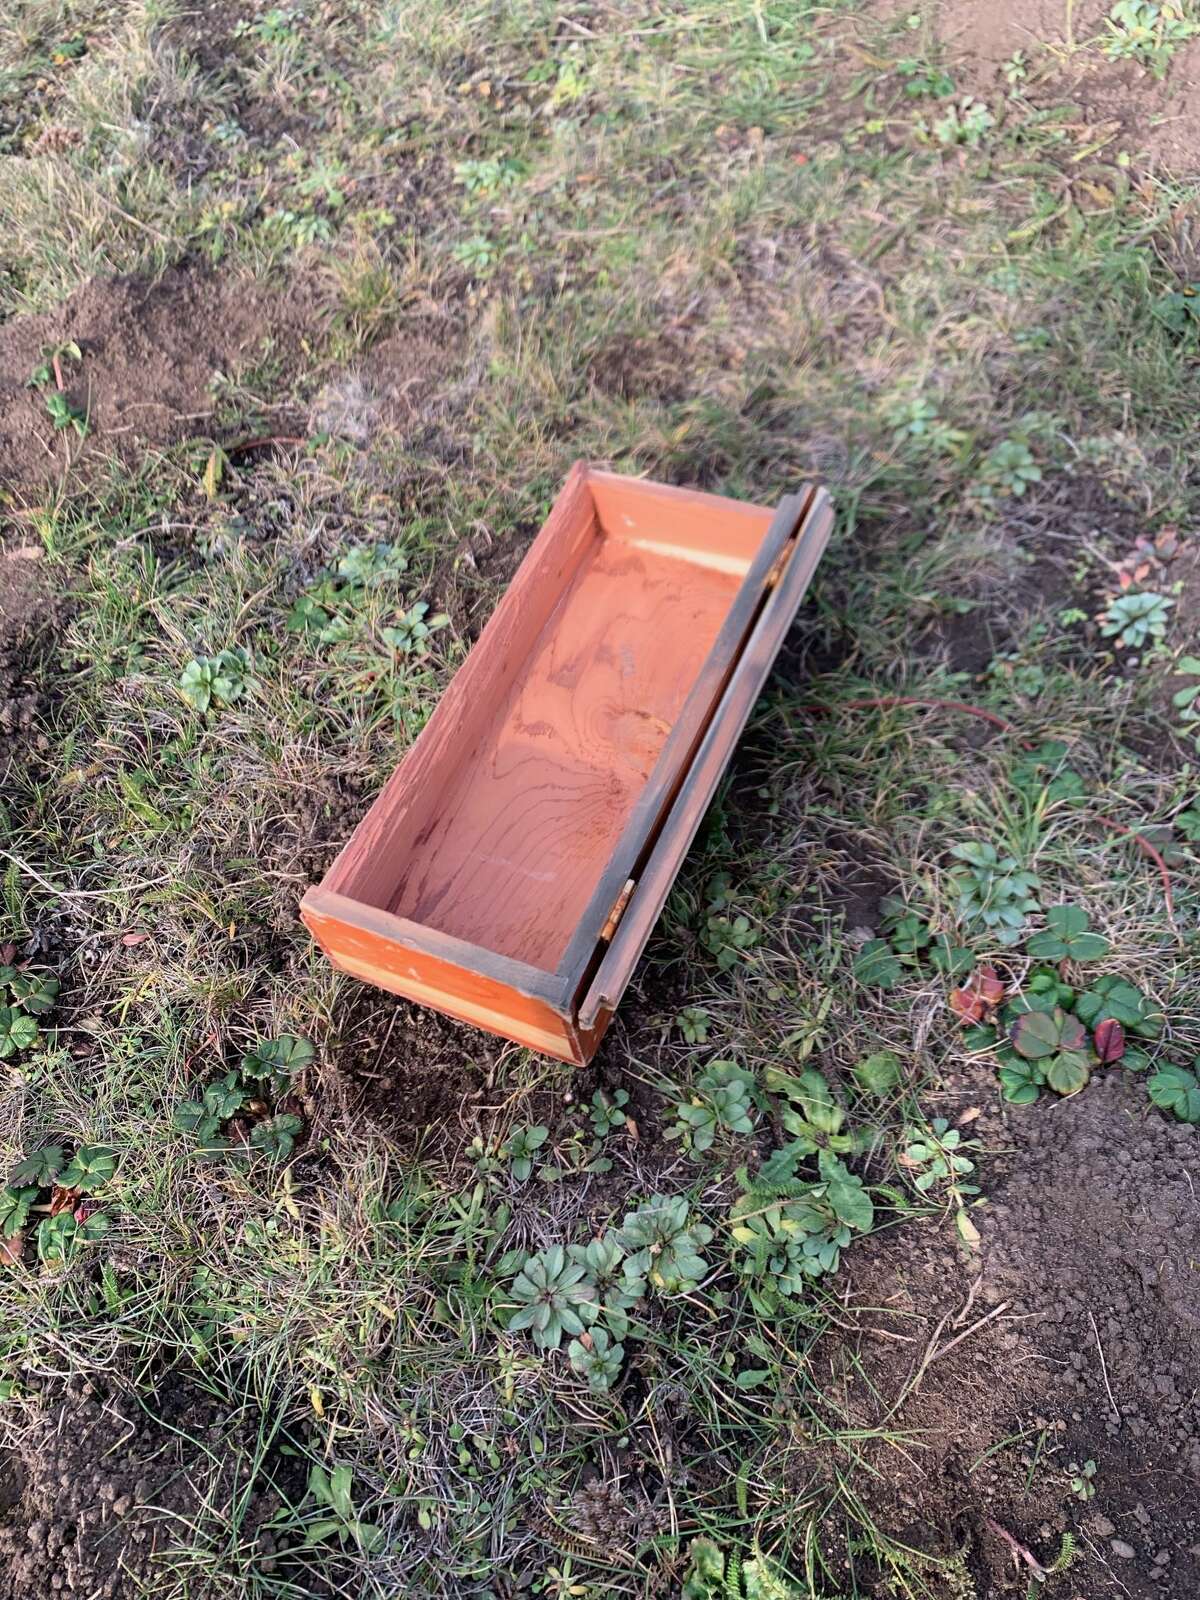 This treasure chest was passed down from the Lewis family.  He ran aground on the beach on Sunday.